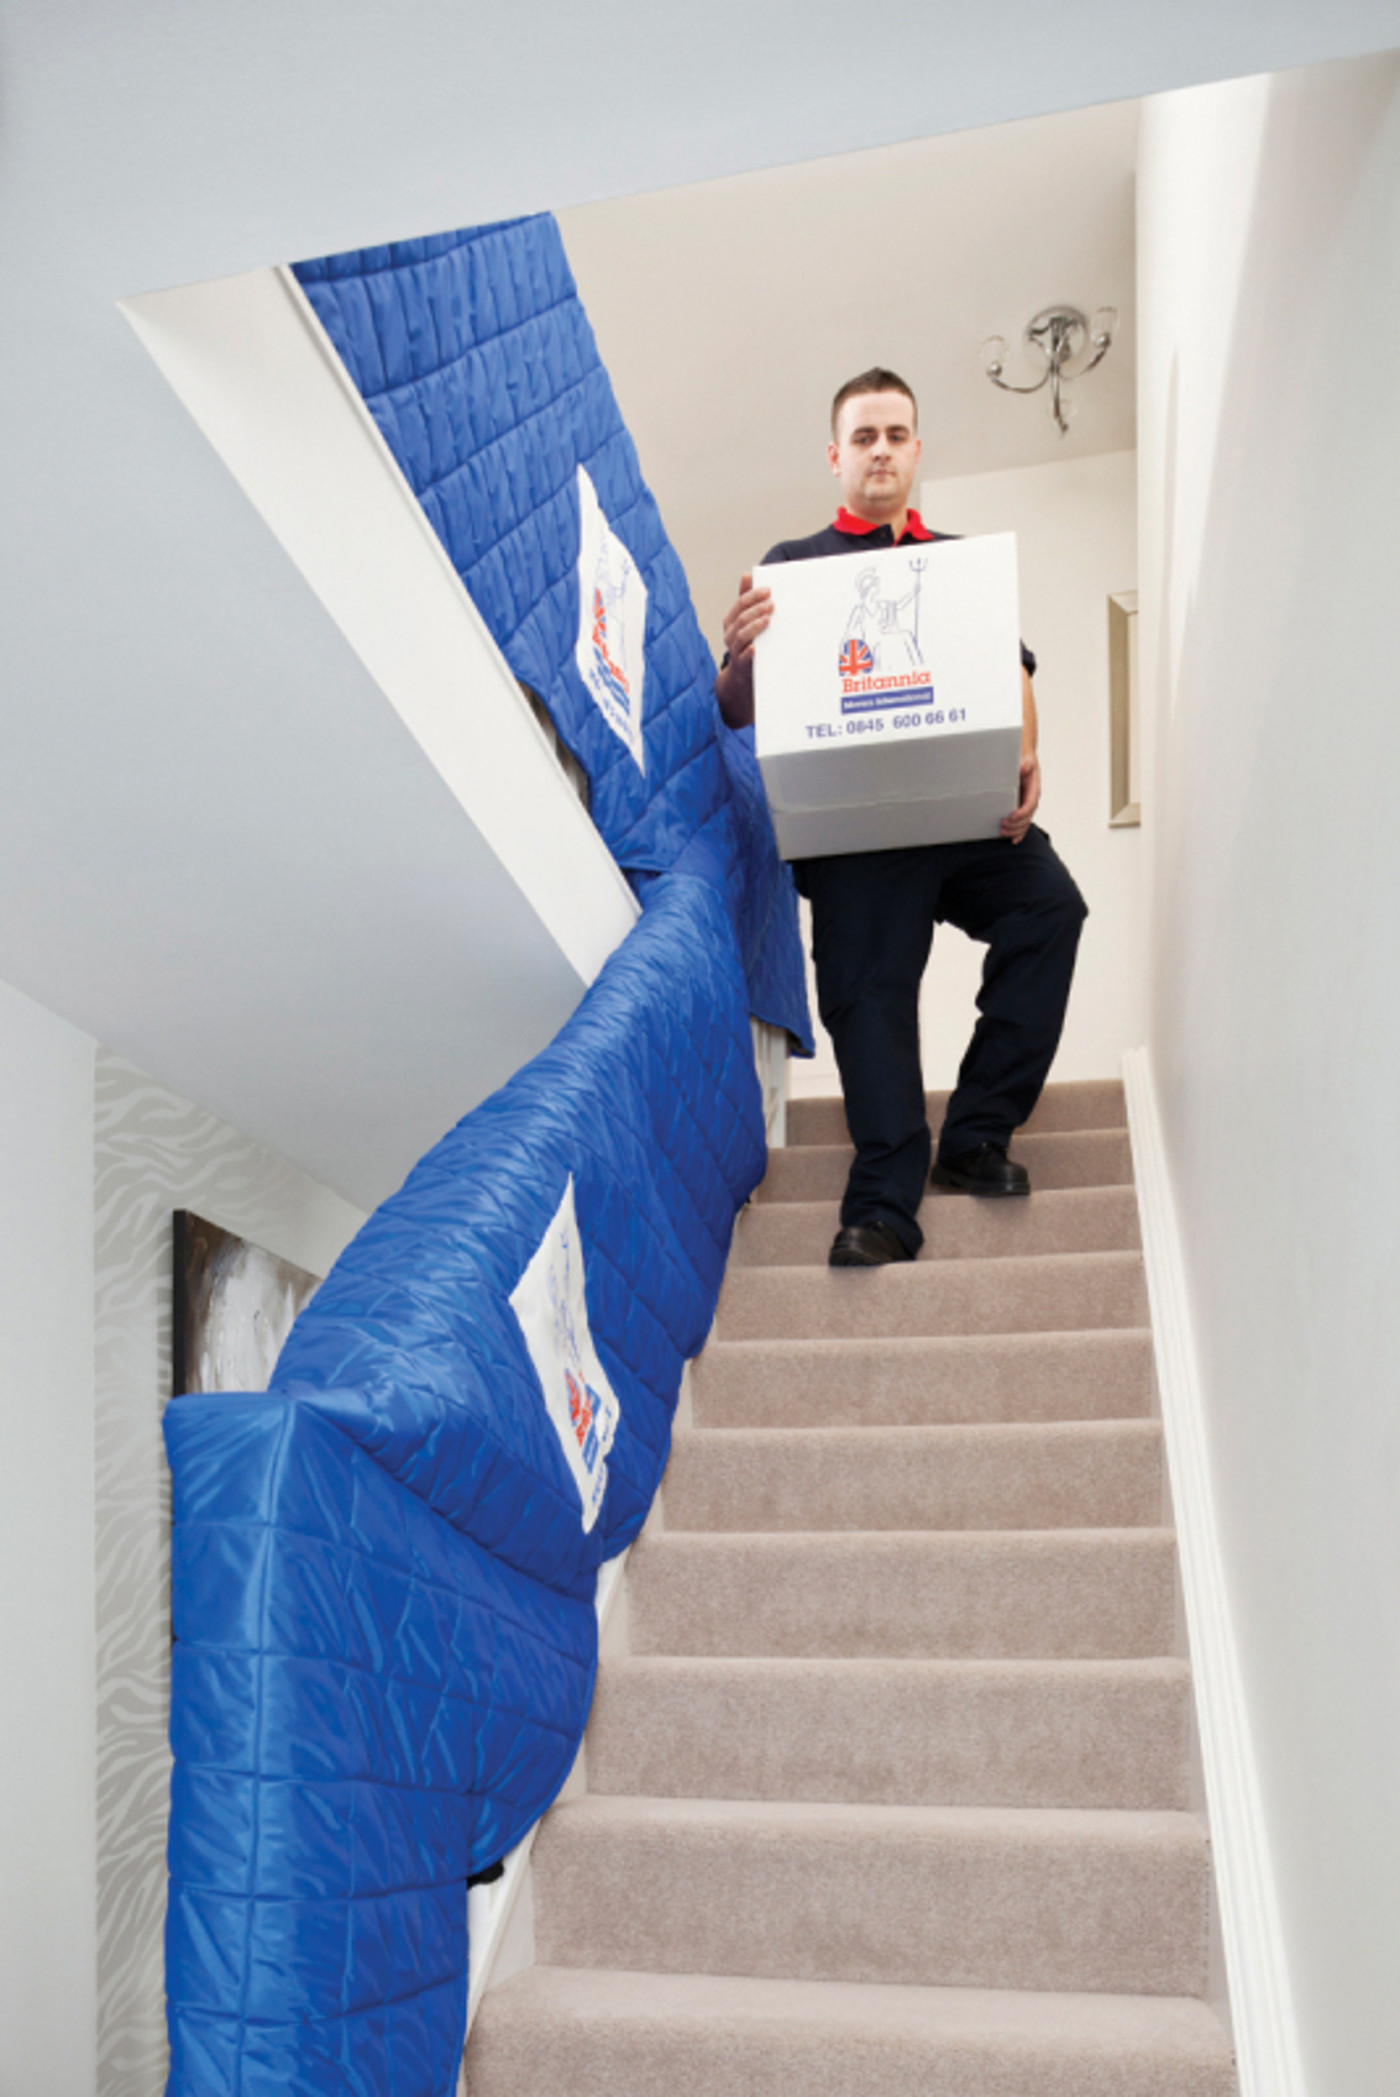 BMI Carrying Items Down the Stairs